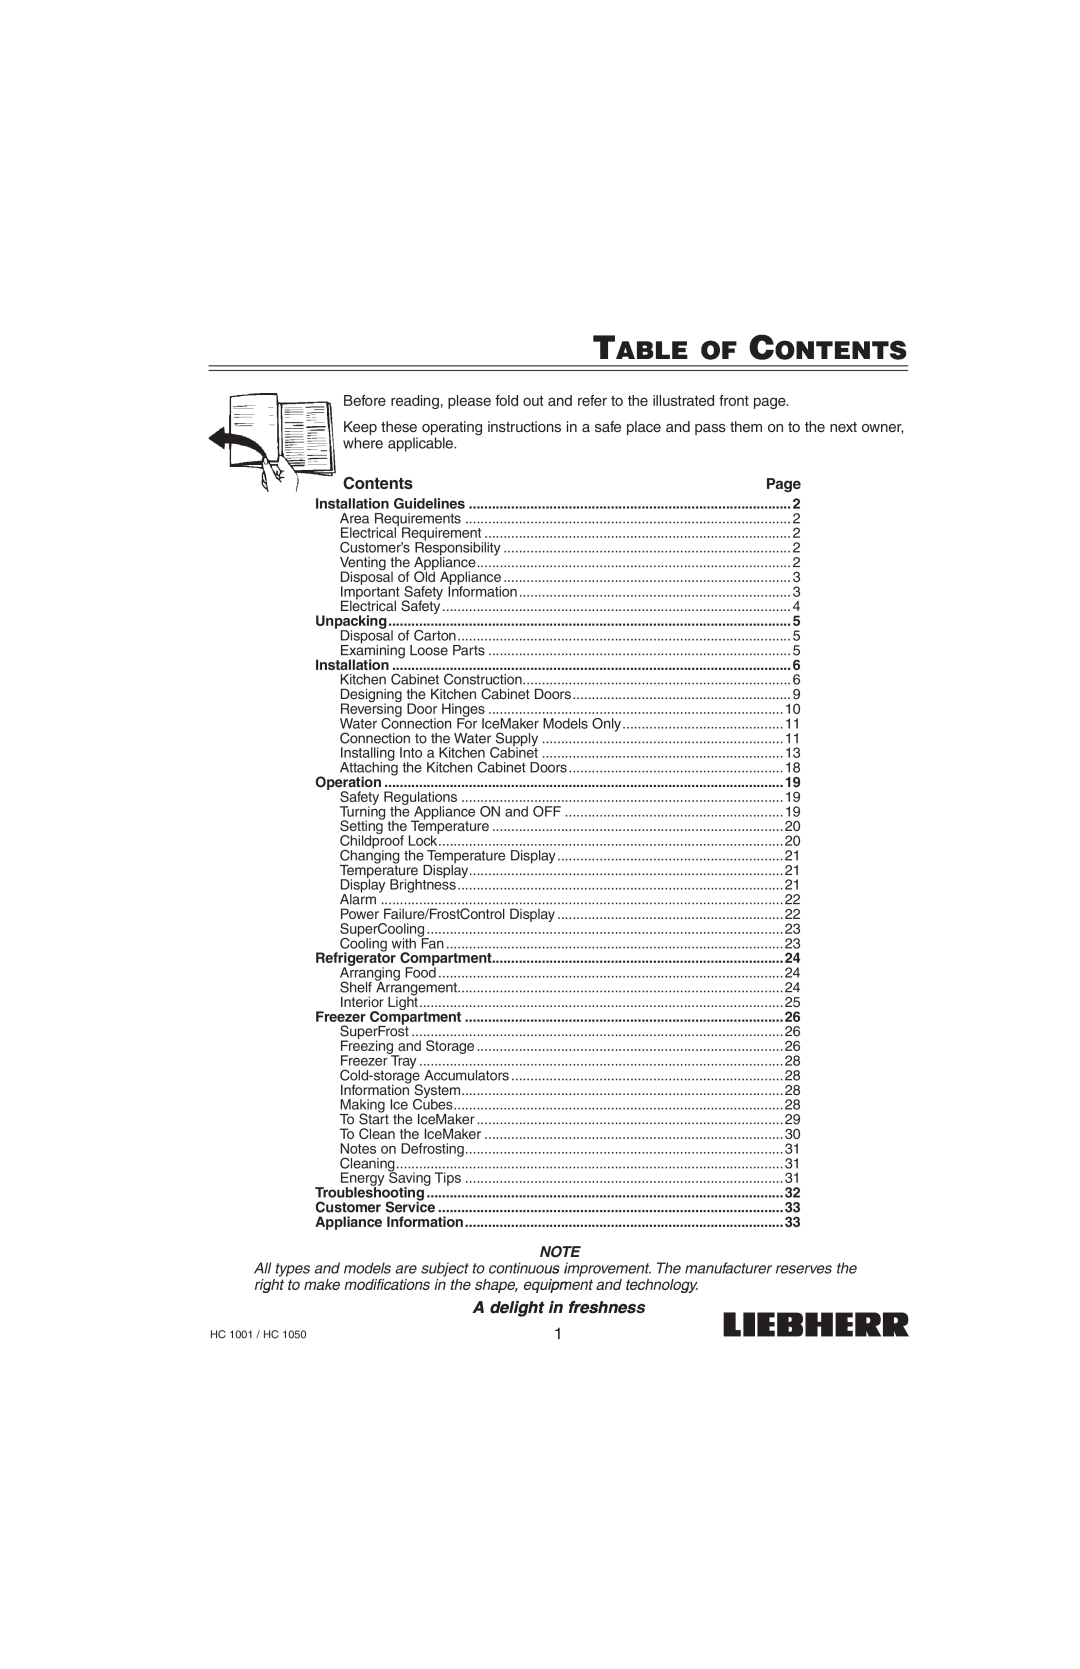 Liebherr HC1050, HC1001 installation manual Table Of Contents, A delight in freshness 